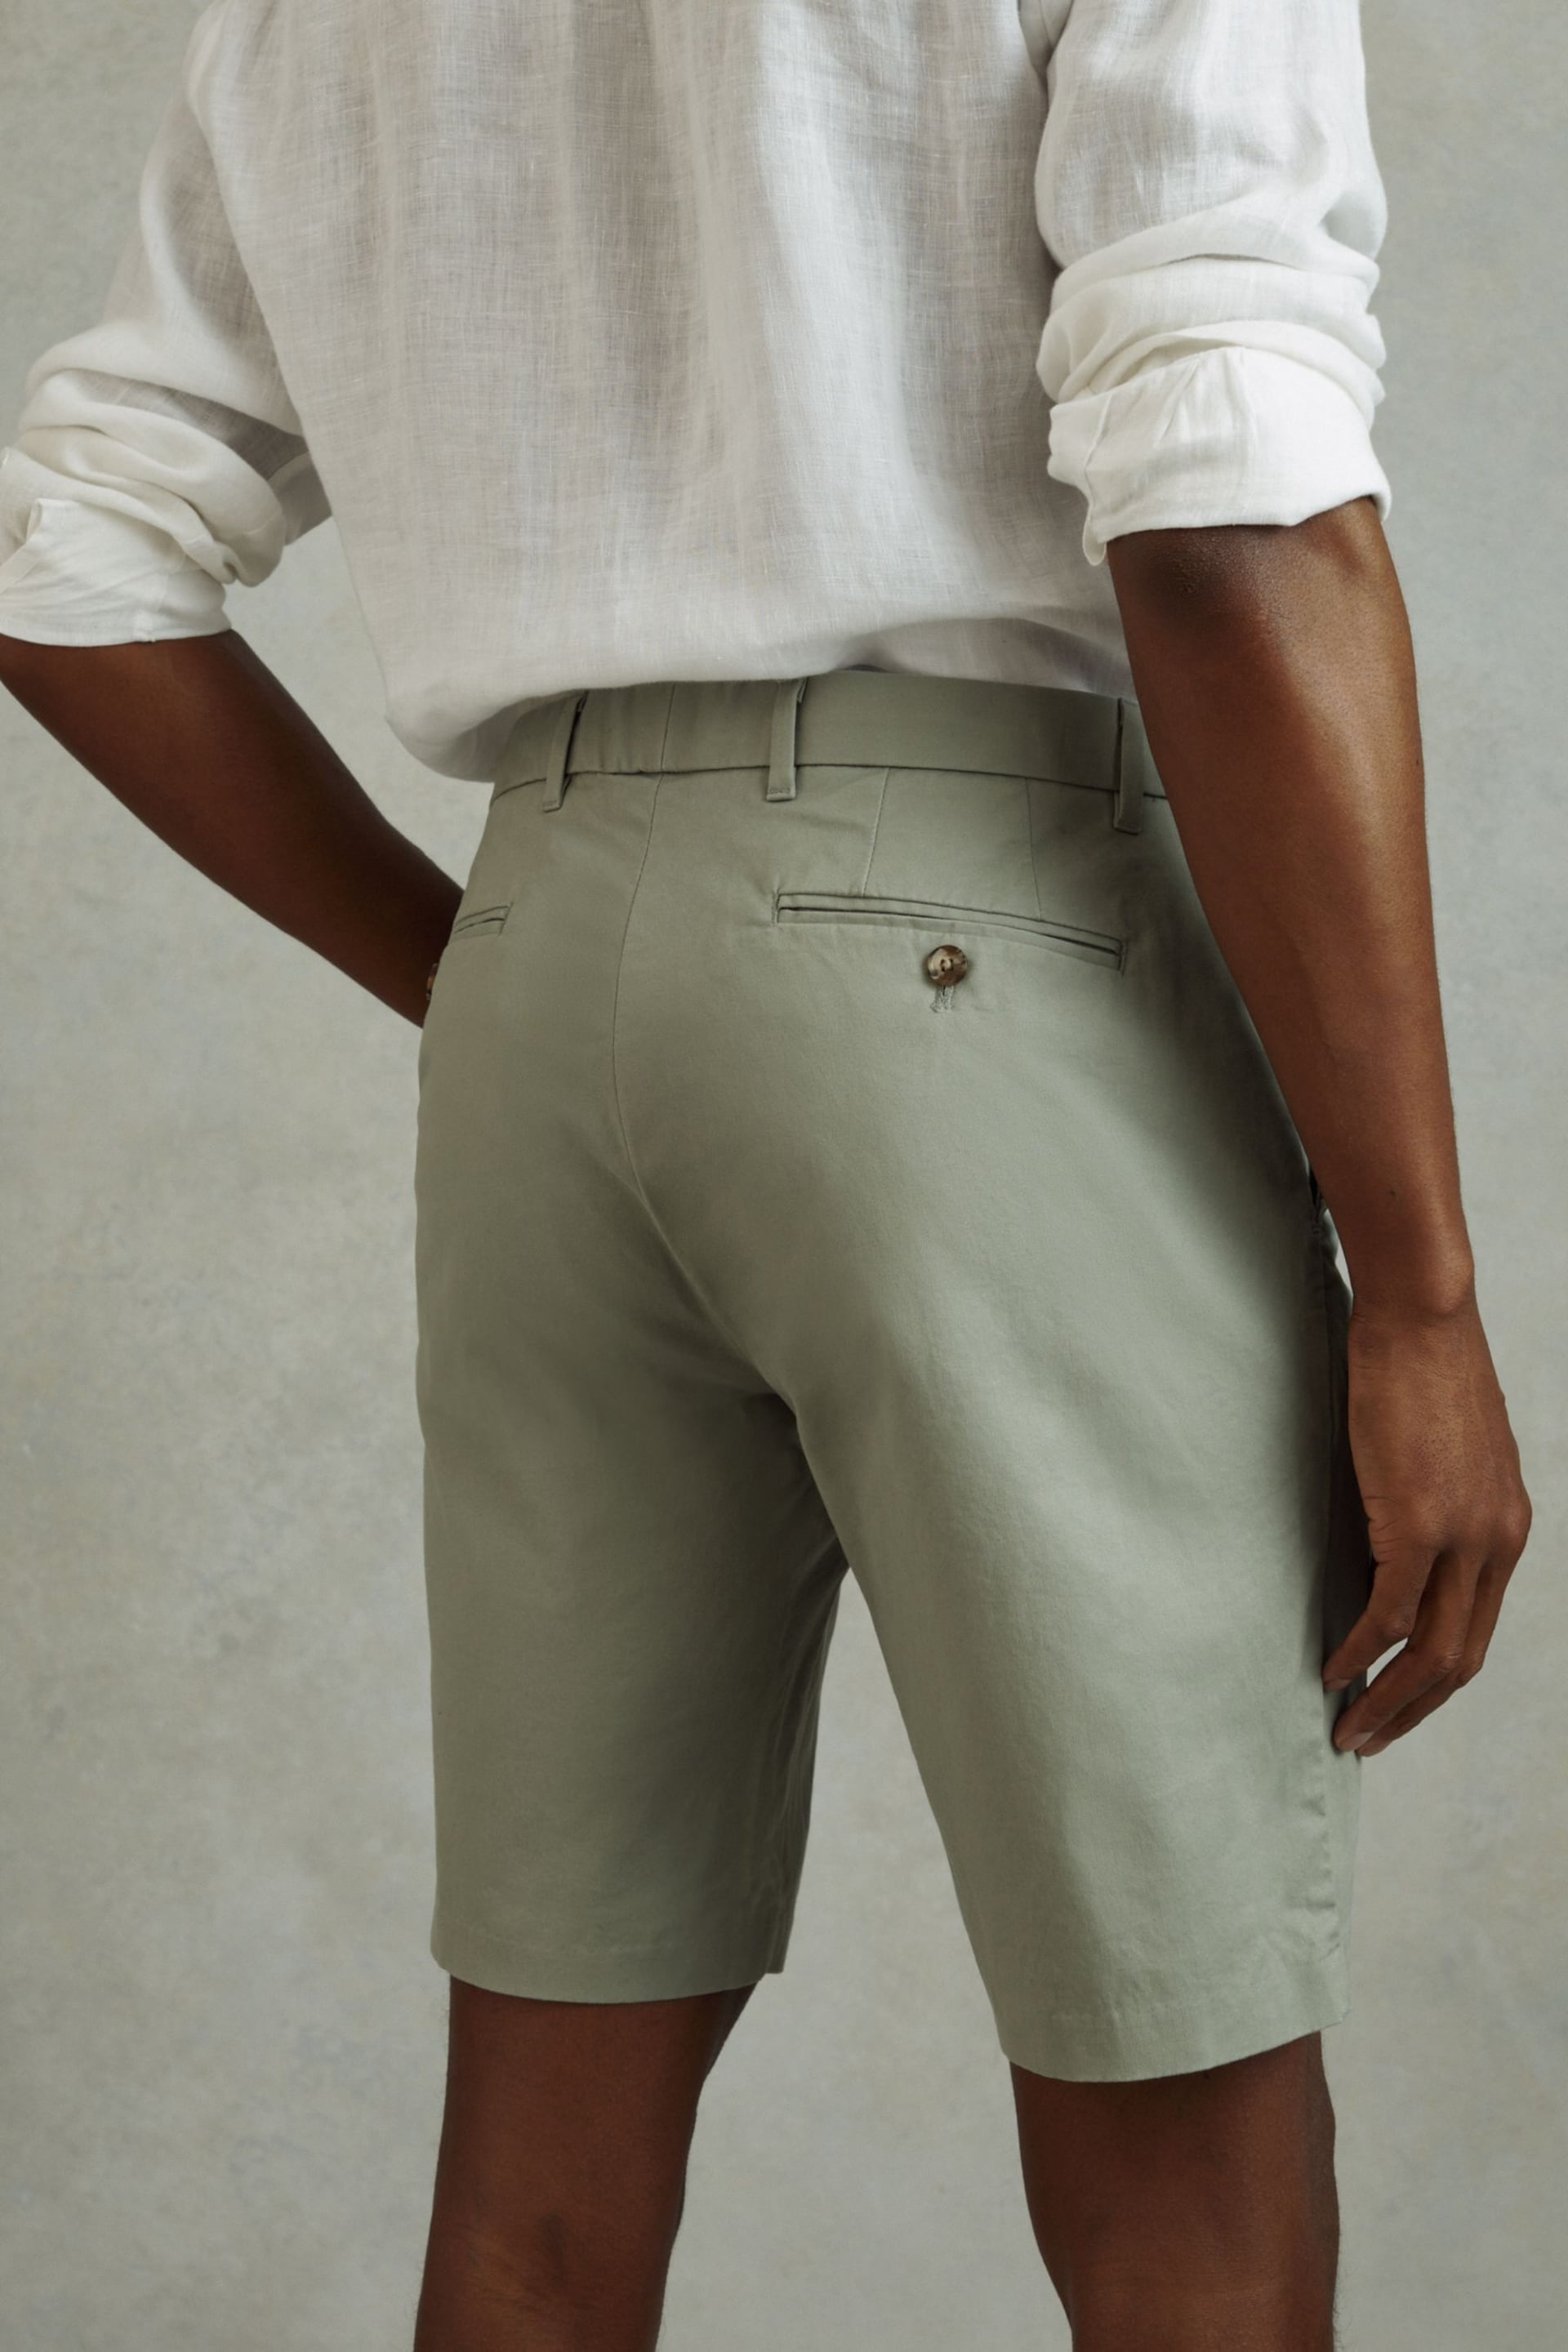 Reiss Pistachio Wicket Modern Fit Cotton Blend Chino Shorts - Image 4 of 5